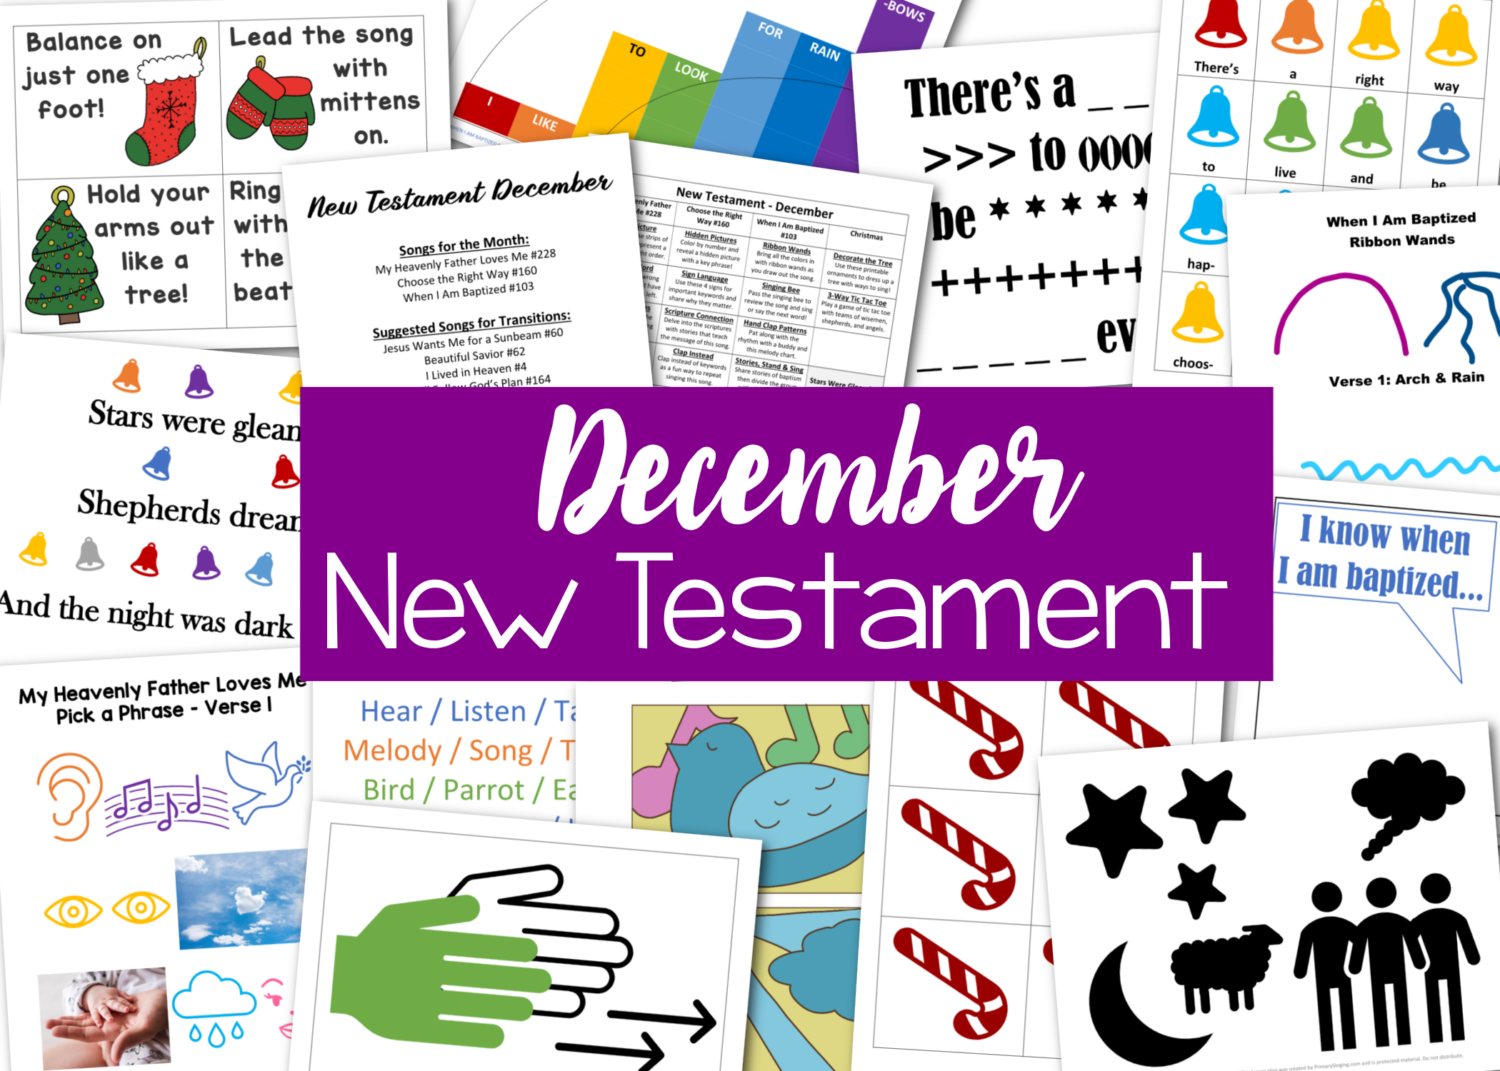 New Testament December Primary Songs INSTANT Primary Singing time activities and lesson plans over 500 pages of ideas to help you with the 3 suggested songs of the month and Christmas teaching ideas. Includes My Heavenly Father Loves Me, Choose the Right Way, When I Am Baptized, Christmas, and Stars Were Gleaming teaching ideas. With printable song helps for LDS Primary music leaders perfect for following along with Come Follow Me for Primary.